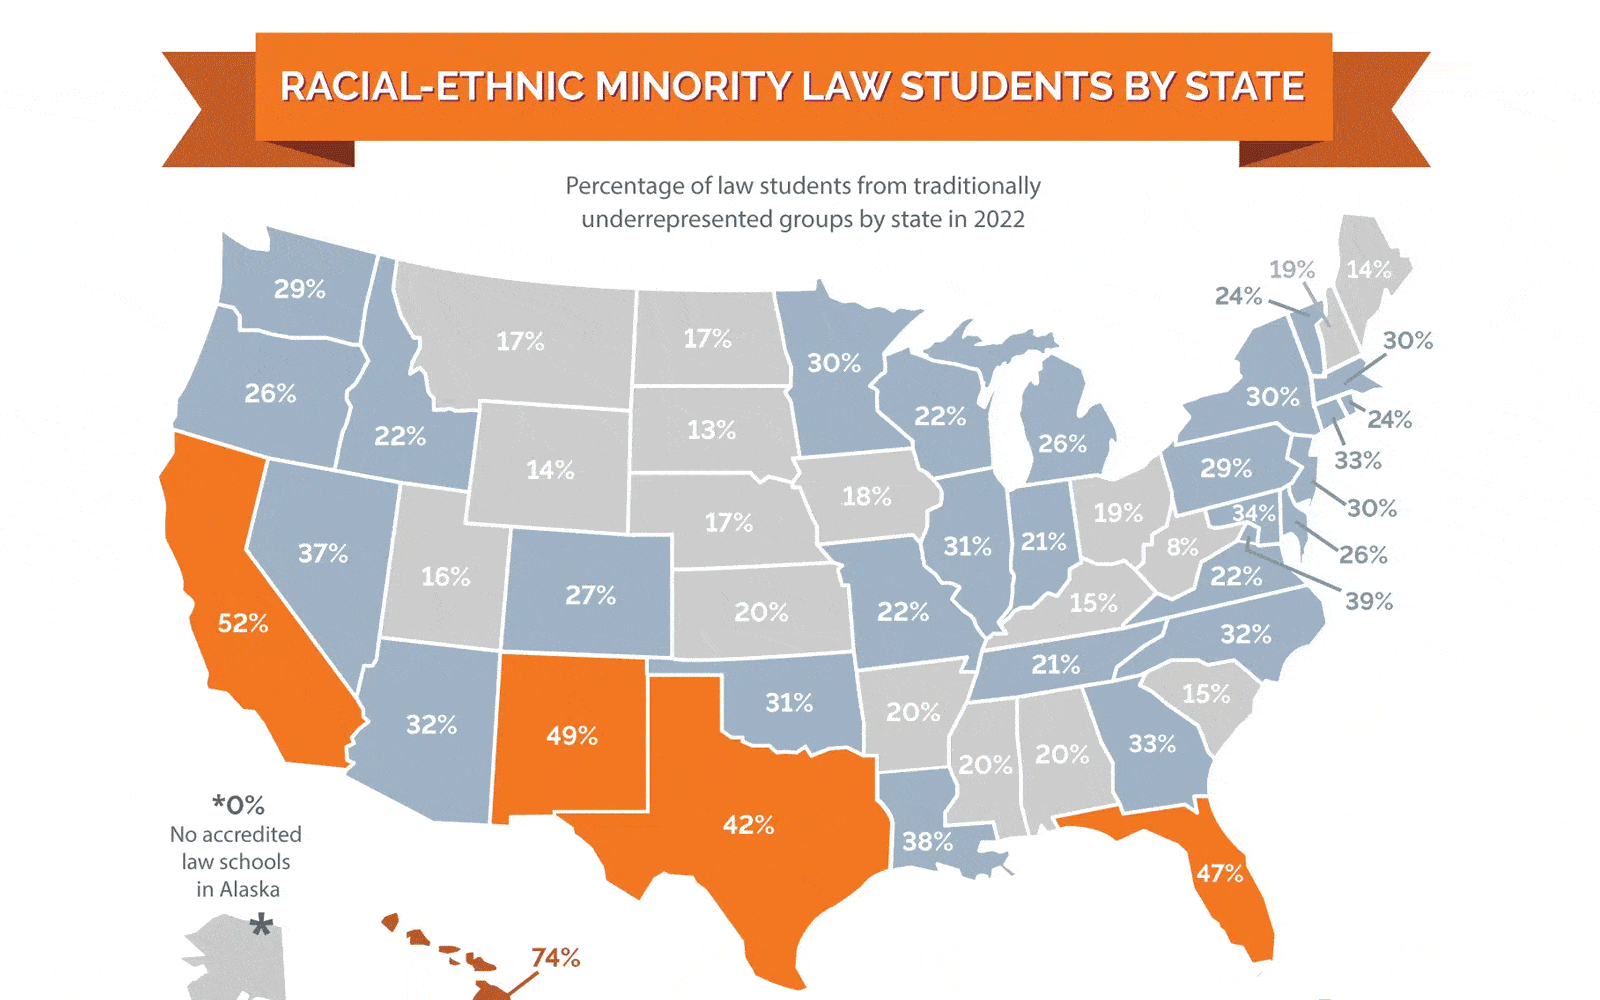 Law school race & ethnicity composition in 2022